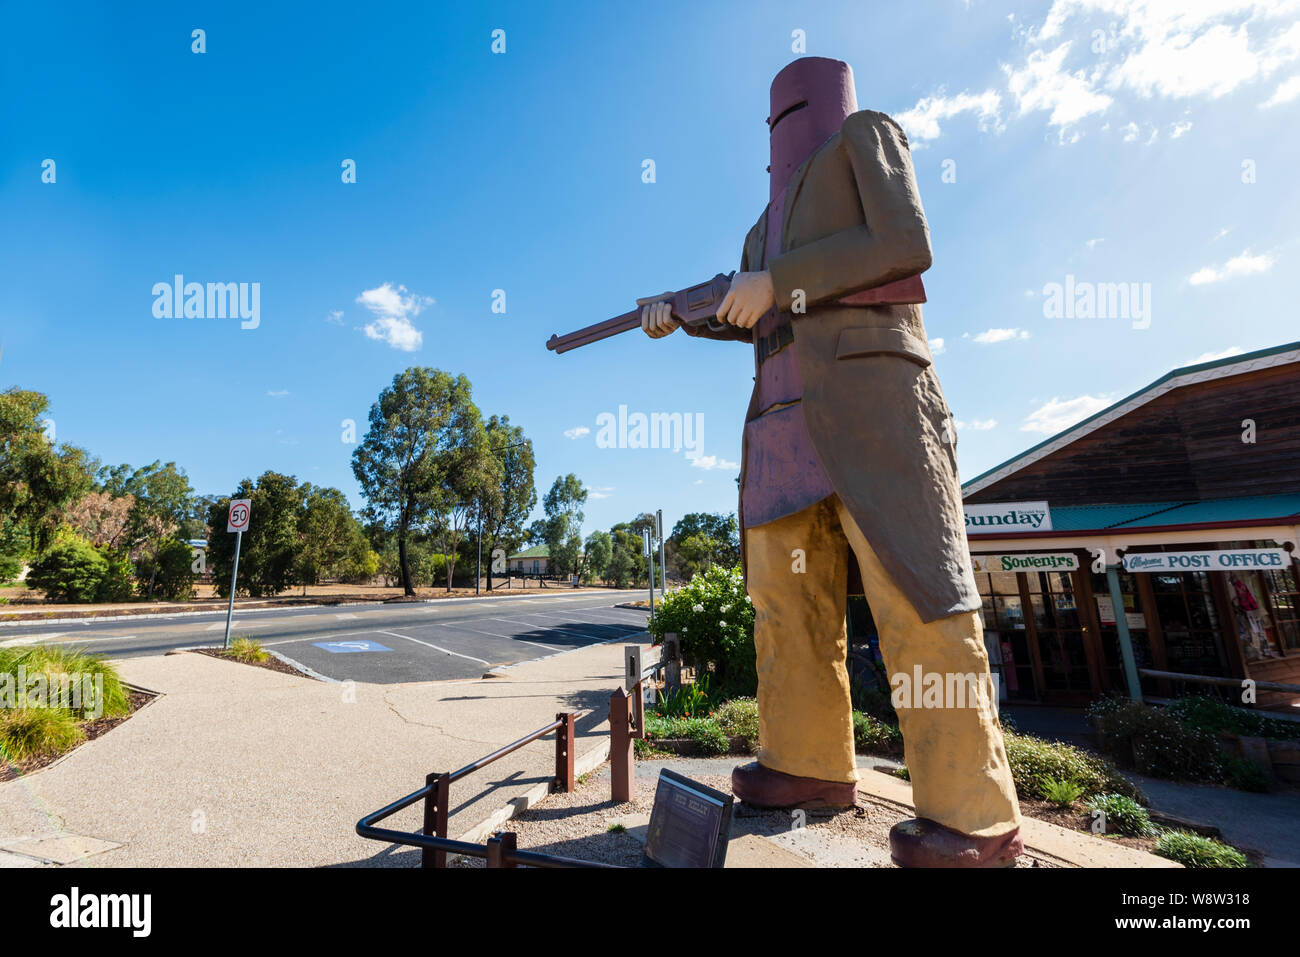 Big Ned Kelly, this large statue of bushranger Ned Kelly in his iconic metal armour is in the country town of Glenrowan in rural Victoria Australia Stock Photo